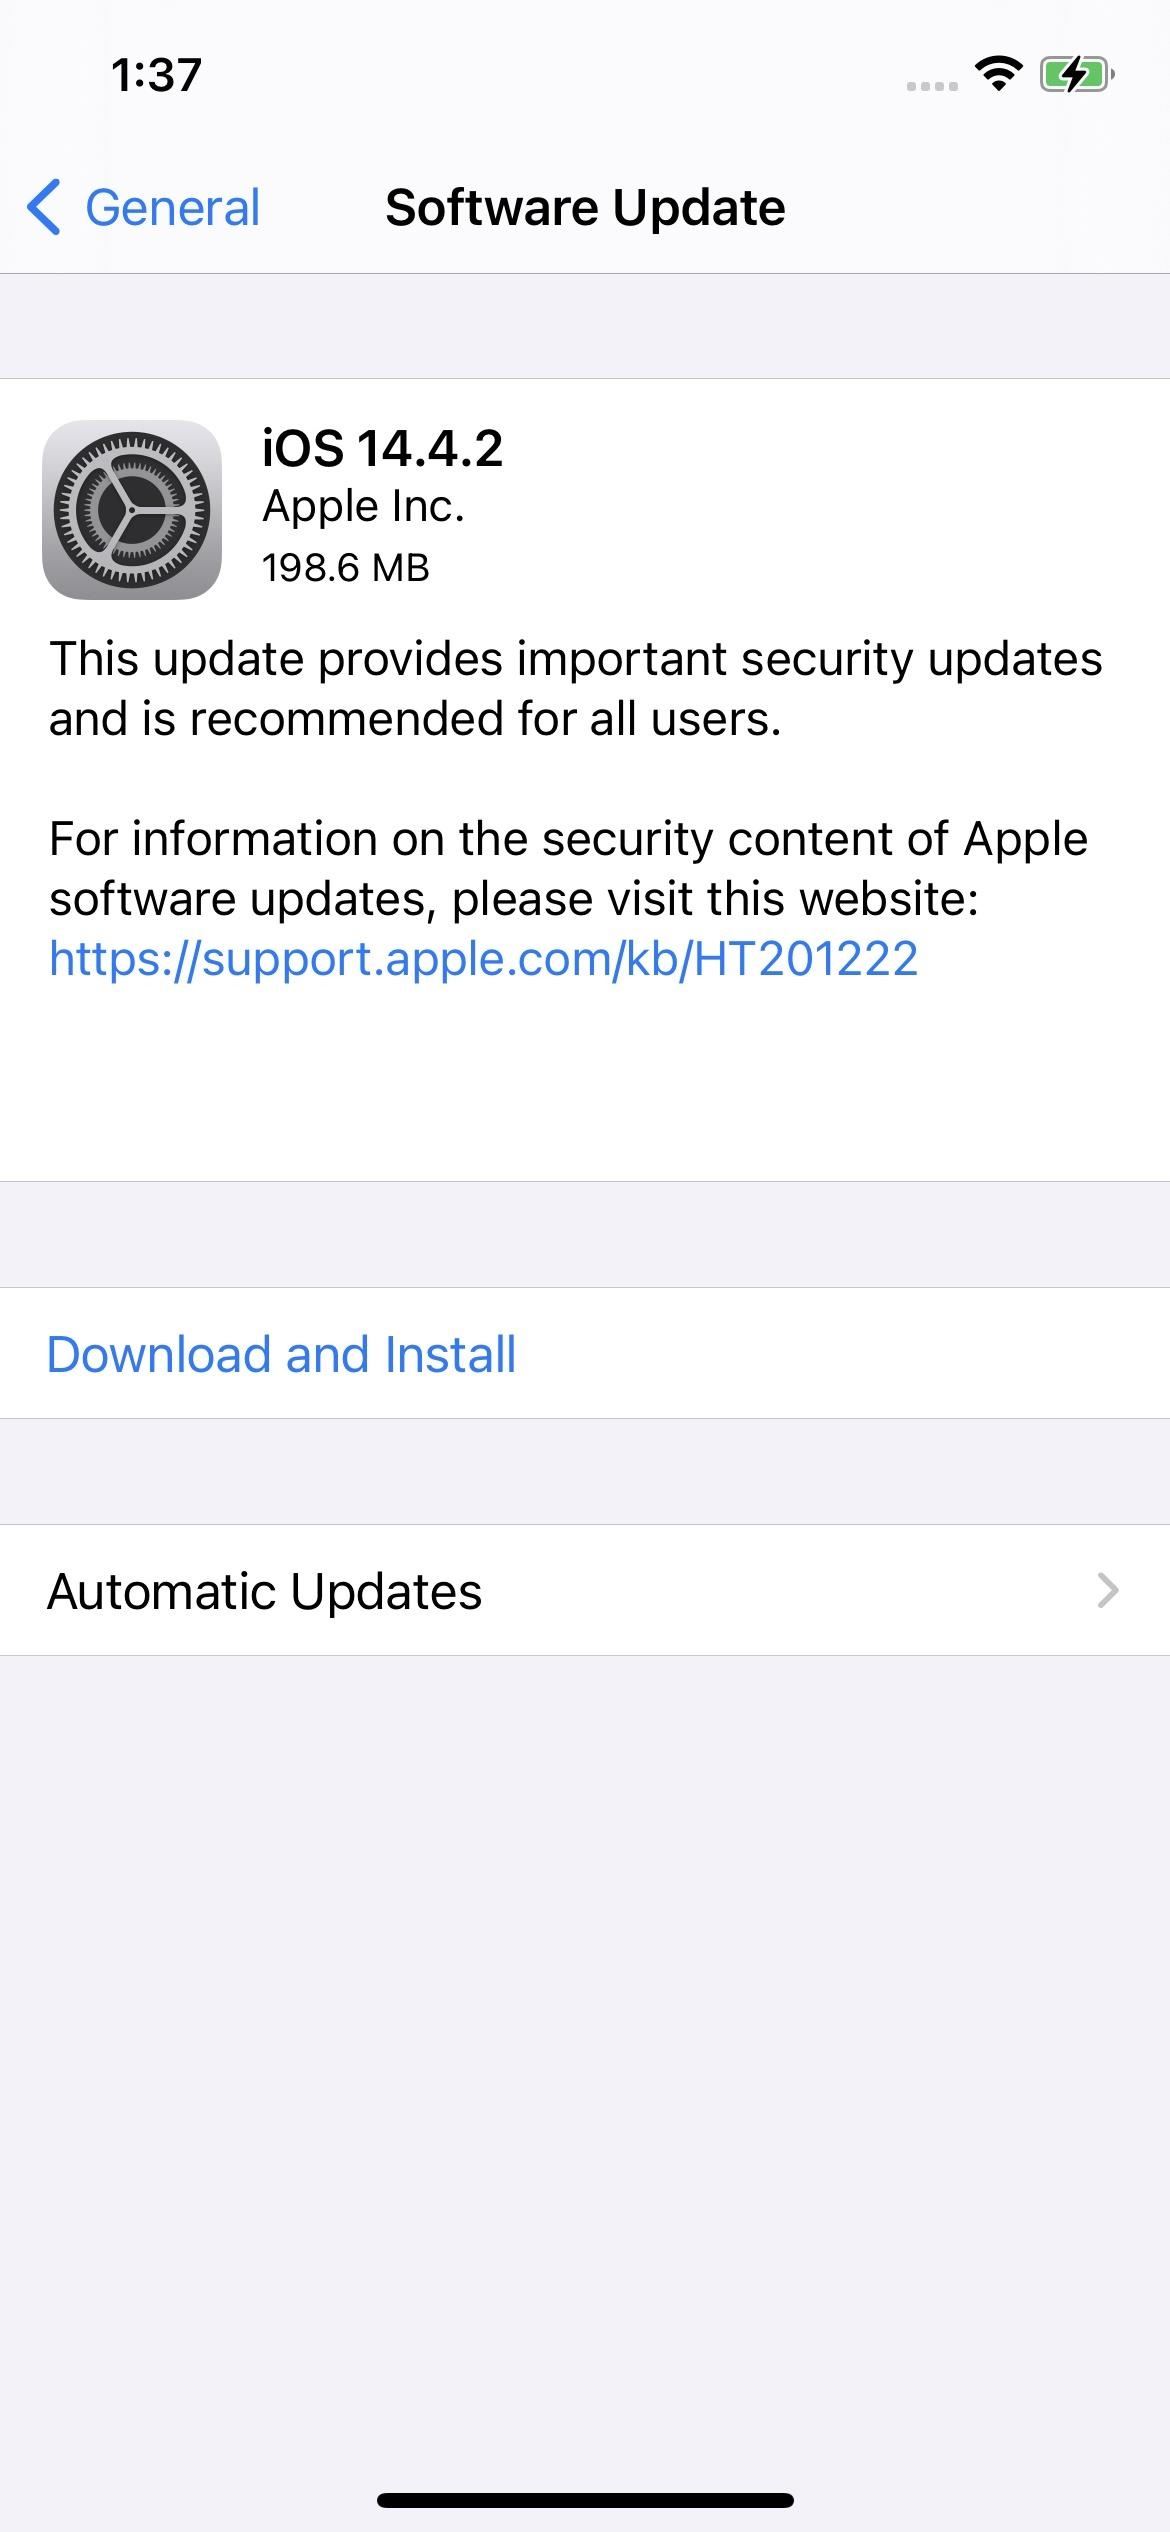 Update Your iPhone to iOS 14.4.2 Right Now to Patch an Actively Exploited WebKit Vulnerability